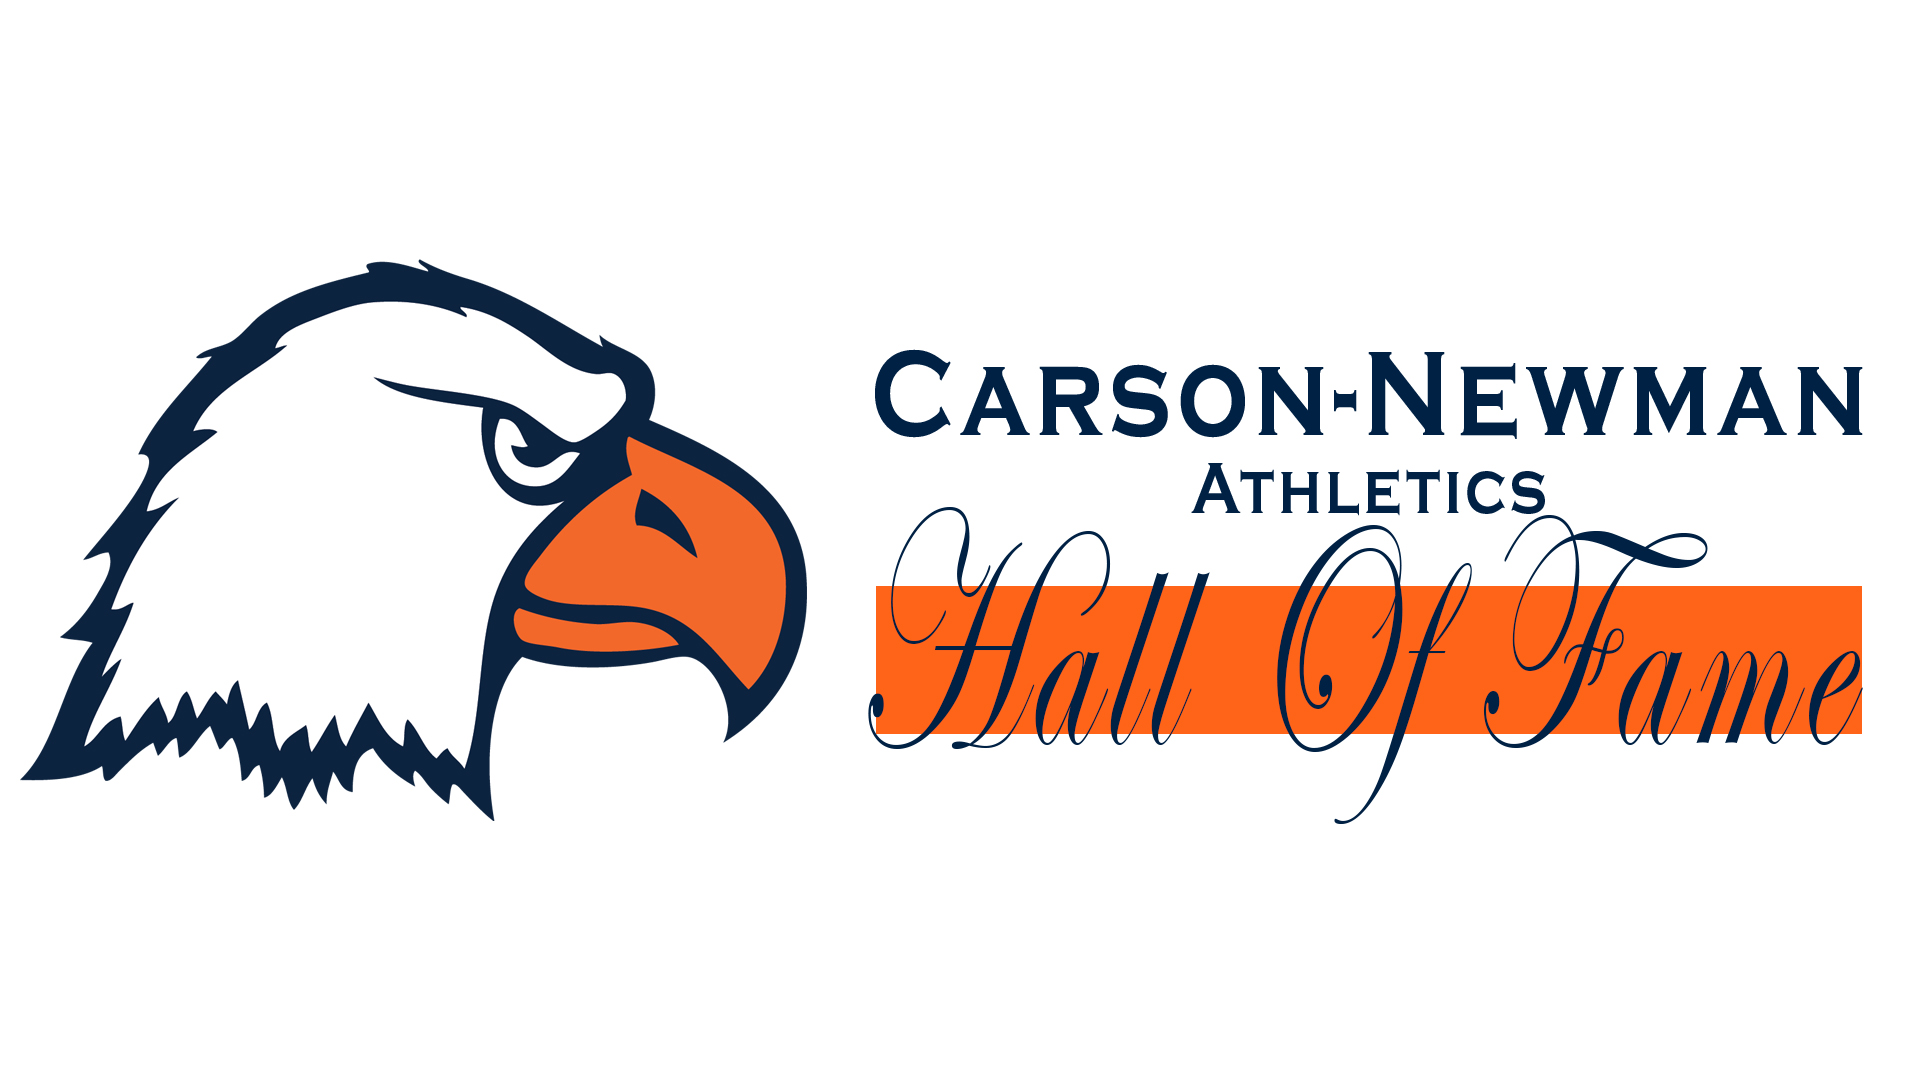 Carson-Newman Athletics Hall of Fame Ceremony set for Friday